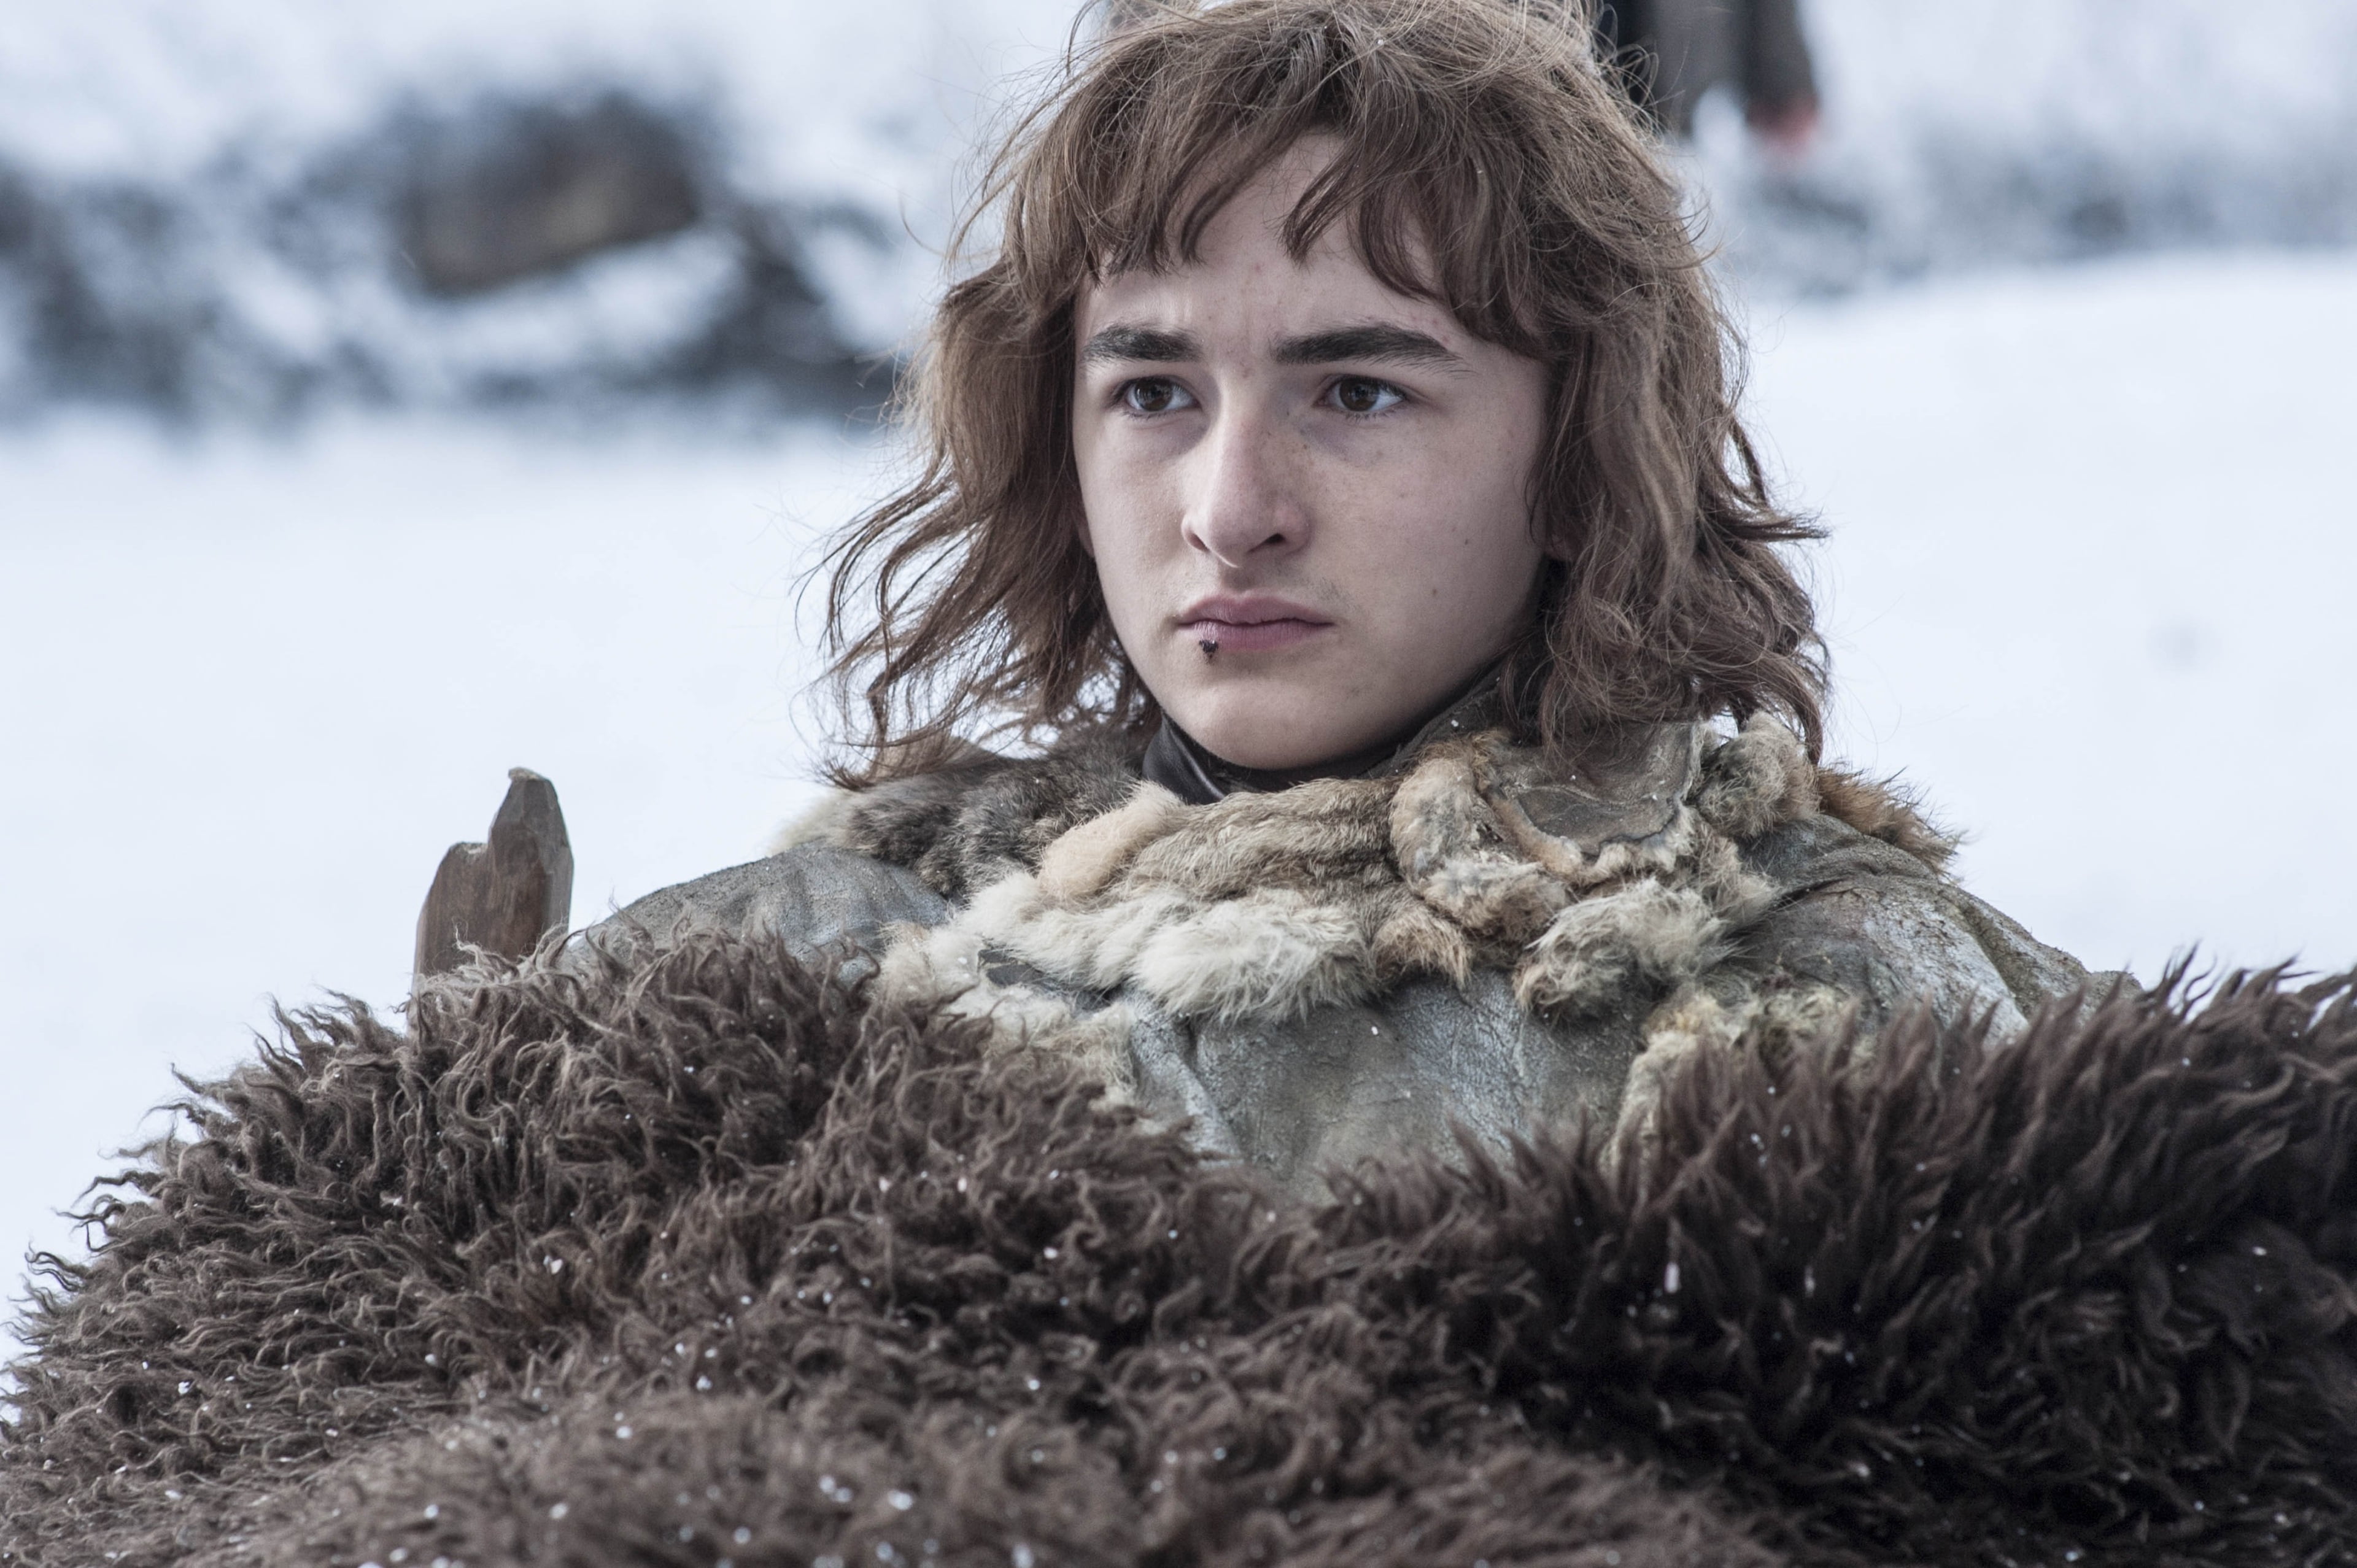 game of thrones 4k wallpaper photo download free, winter, cold temperature